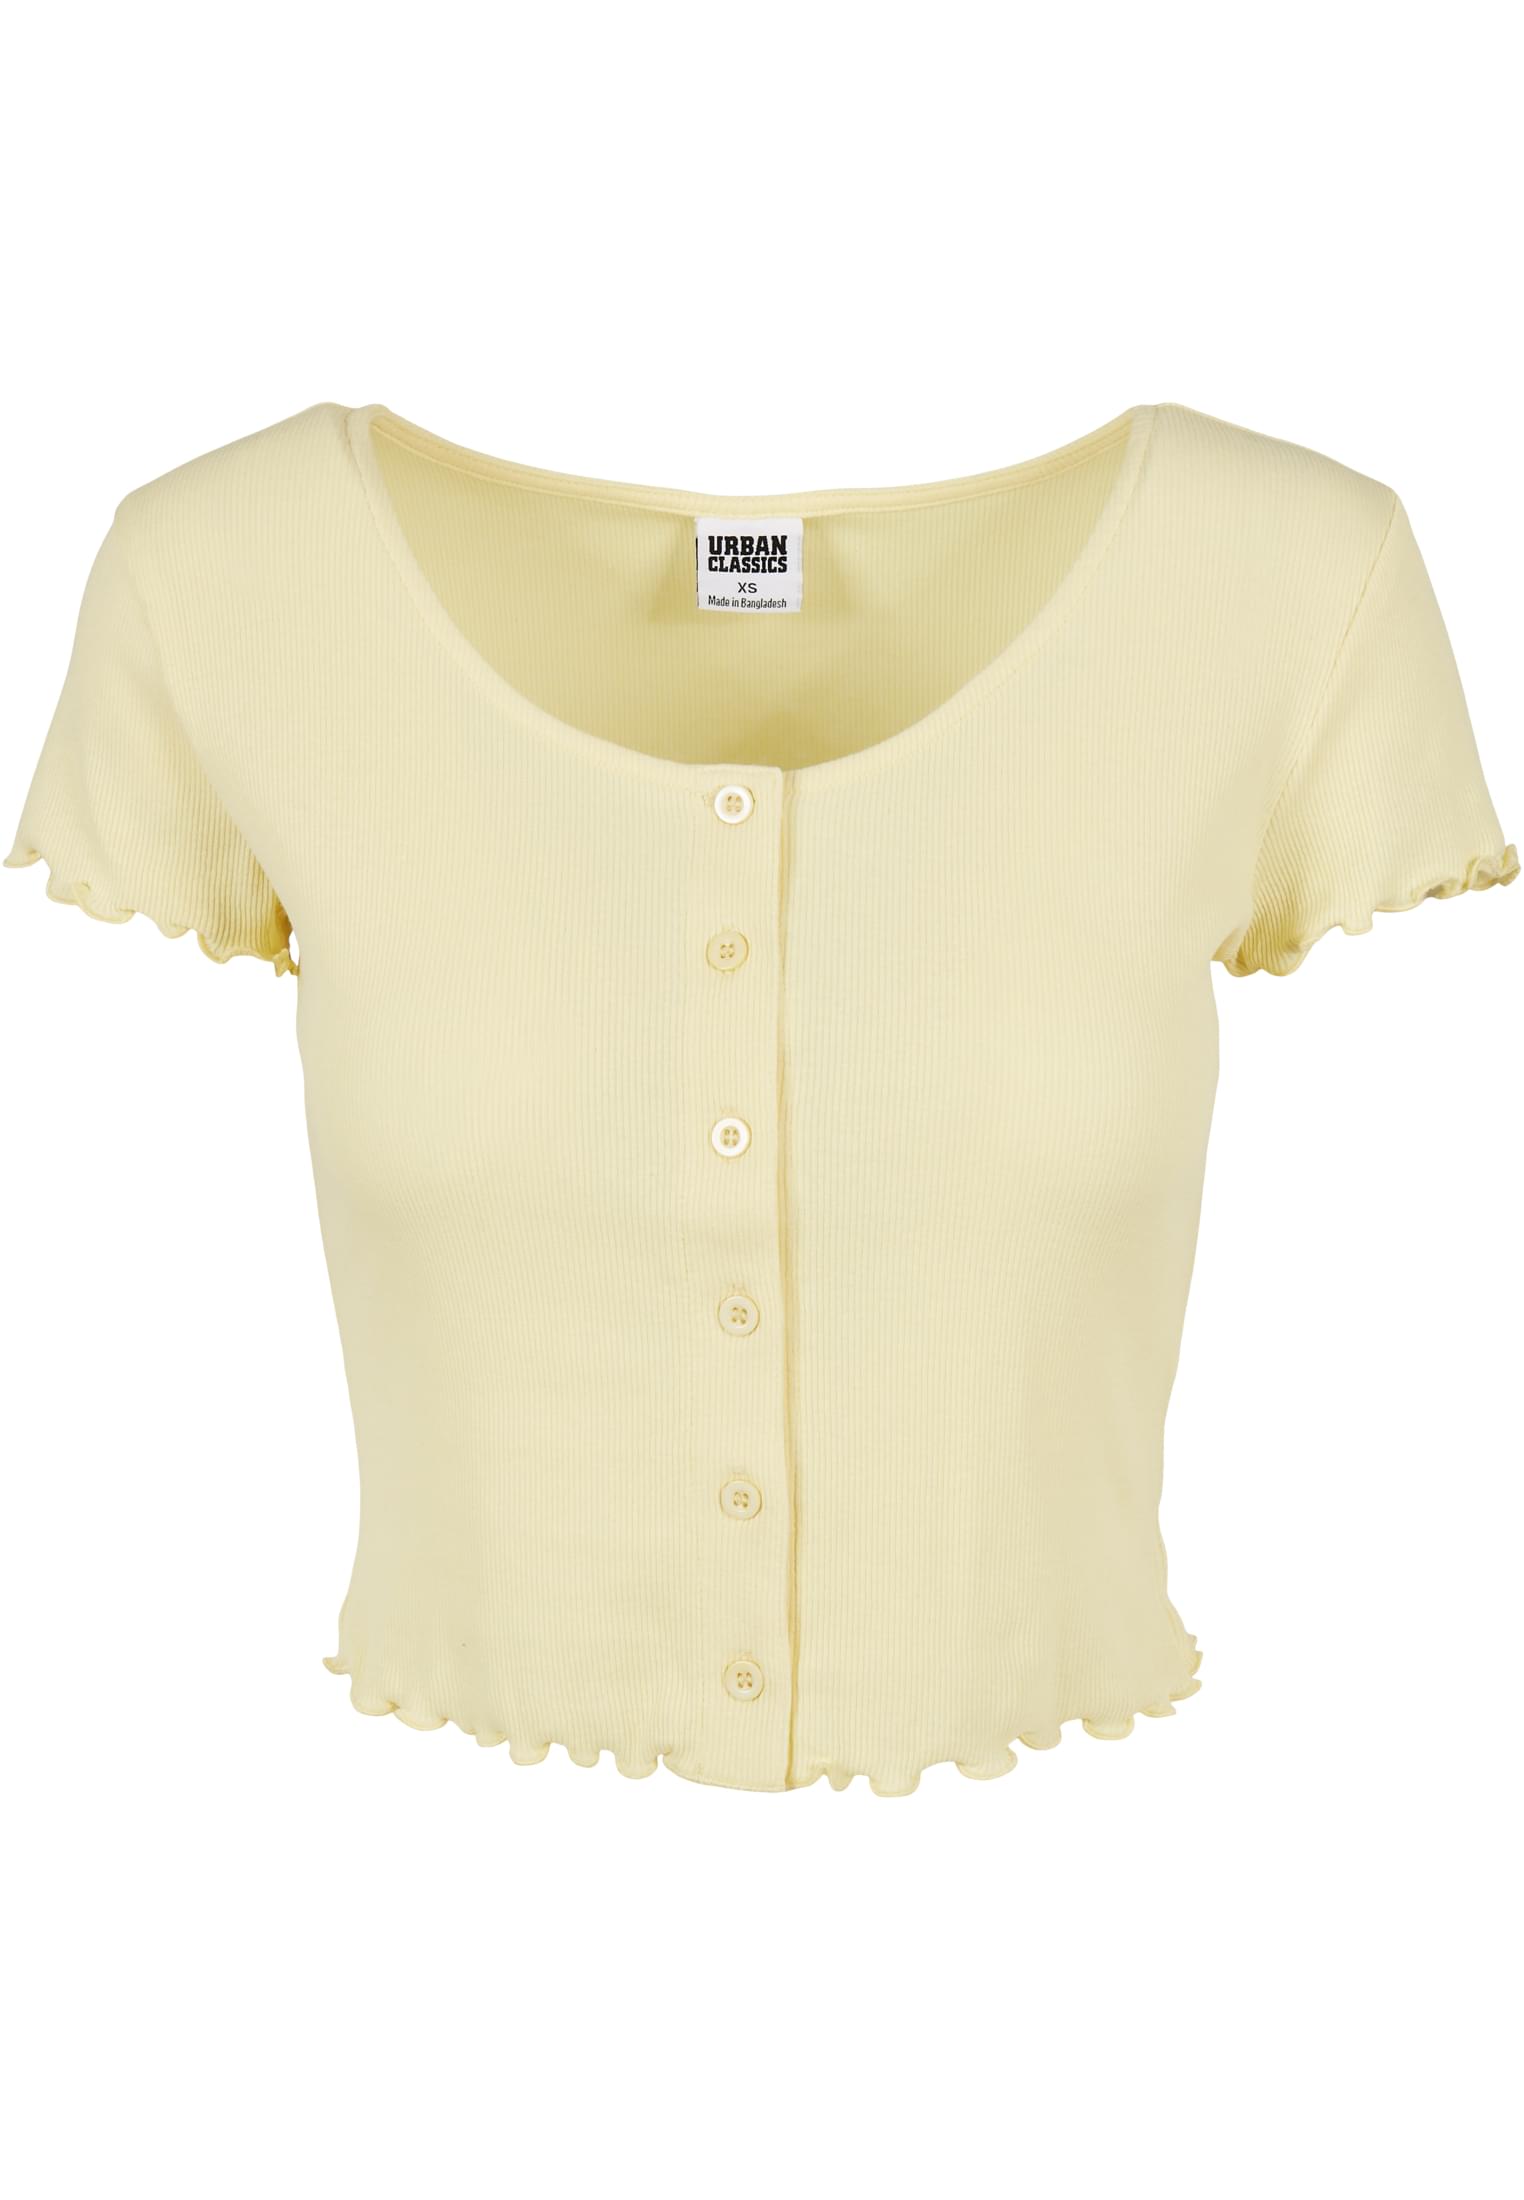 Frauen Ladies Cropped Button Up Rib Tee in Farbe softyellow